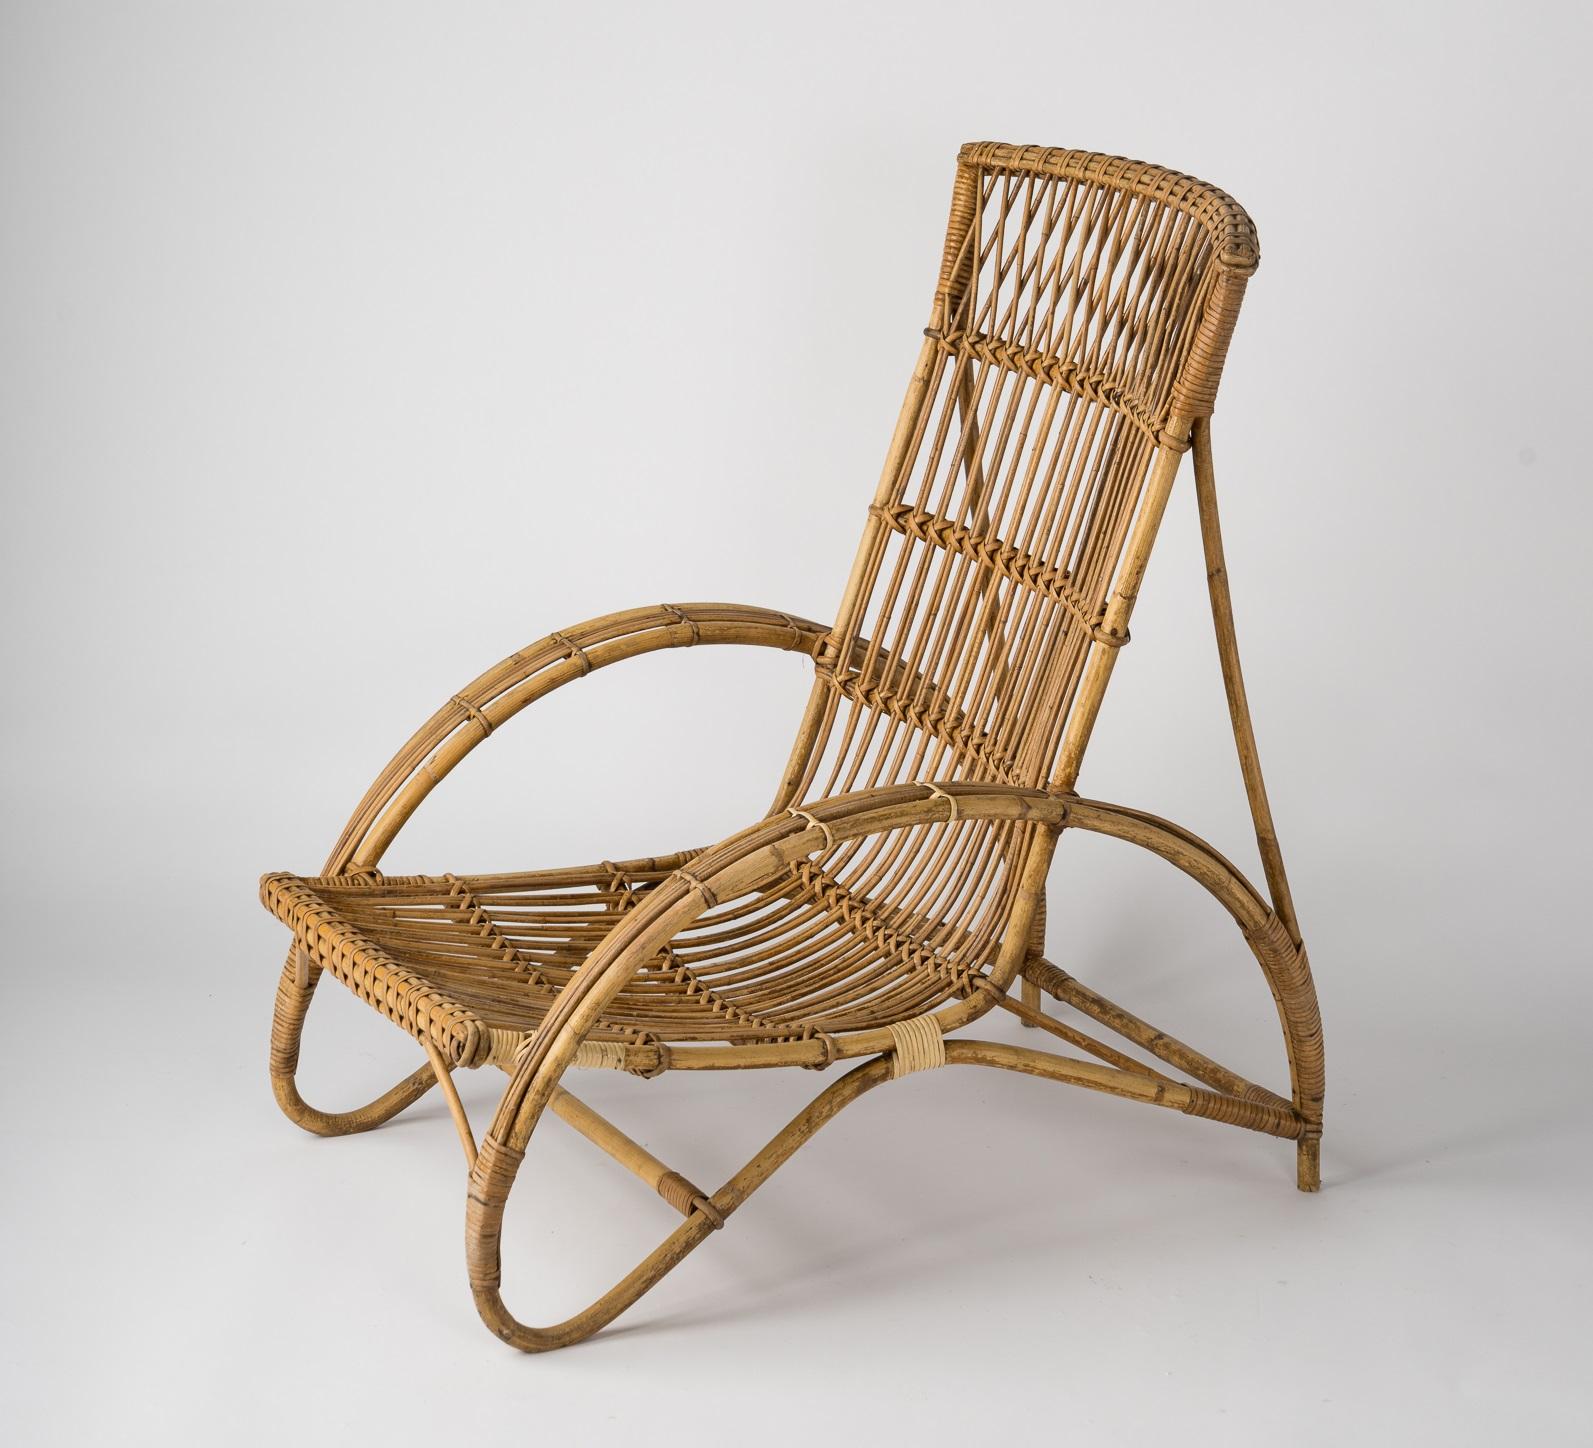 Midcentury rattan lounge chair in the style of Adrien Audoux and Frida Minet, French 1960s. Comfortable and in good vintage condition.